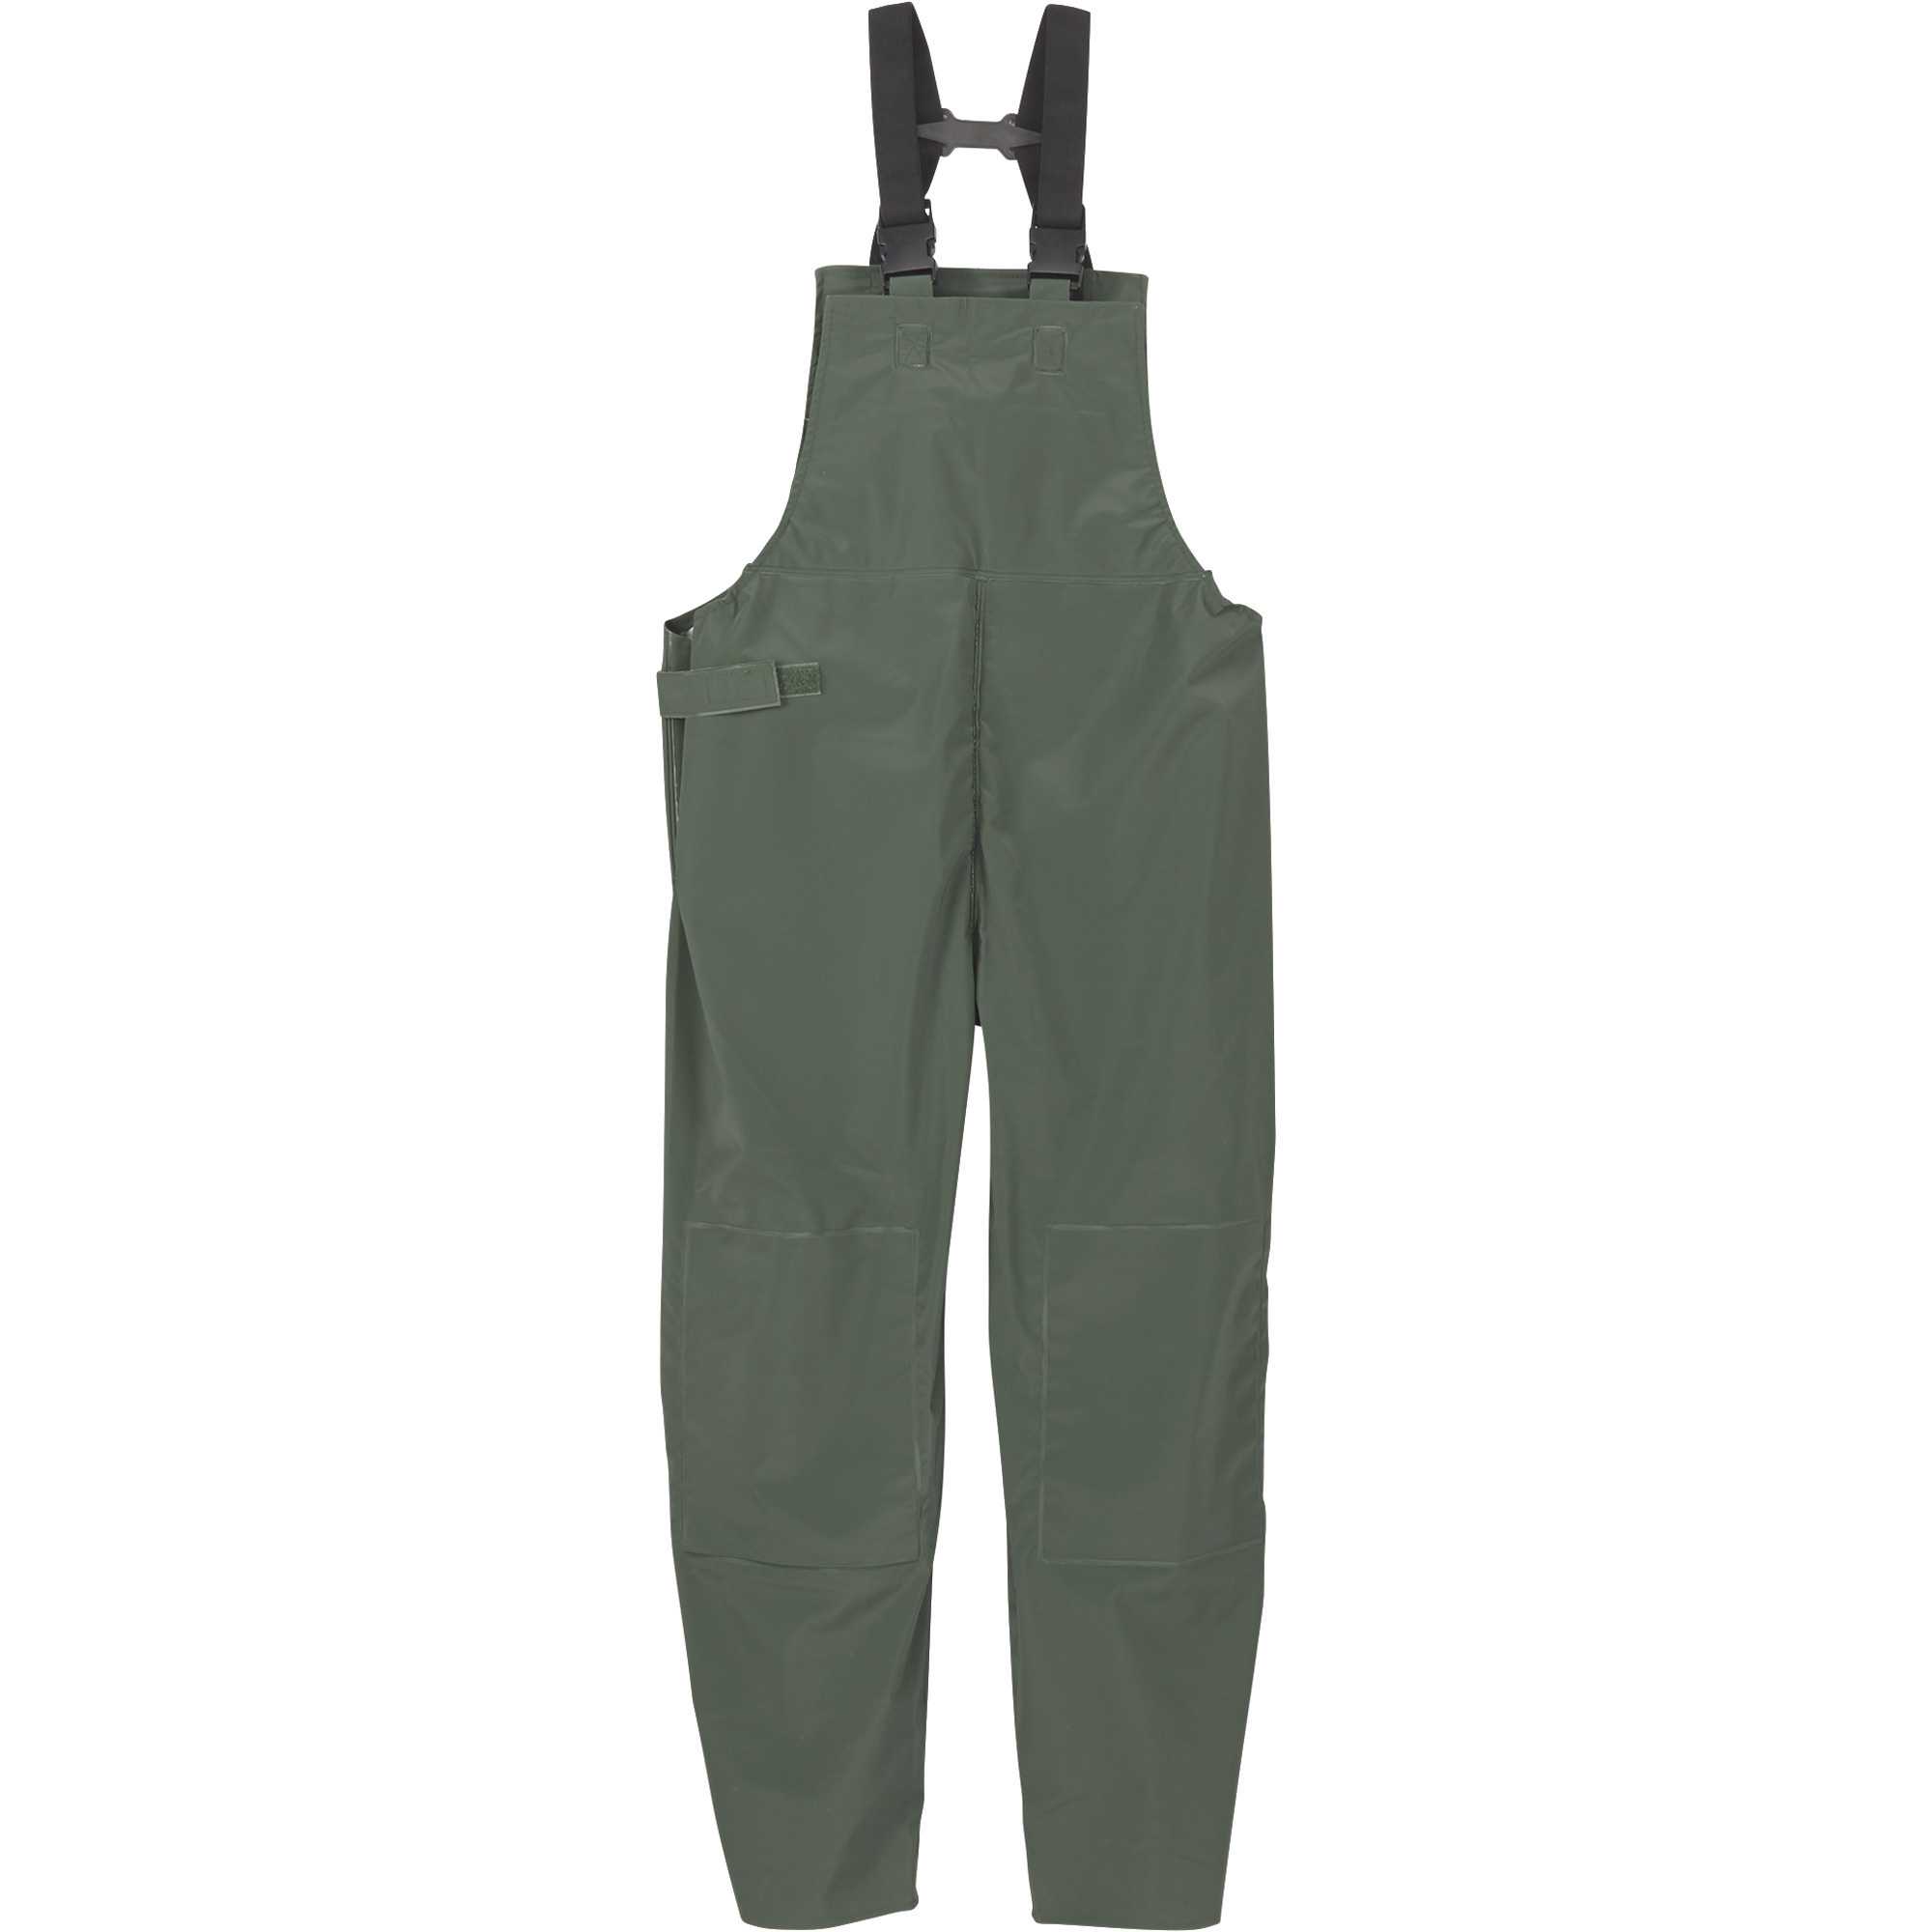 West Chester Men's Protective Gear 50mm PVC Rain Overalls -Olive Green, Large, Model 44800/L